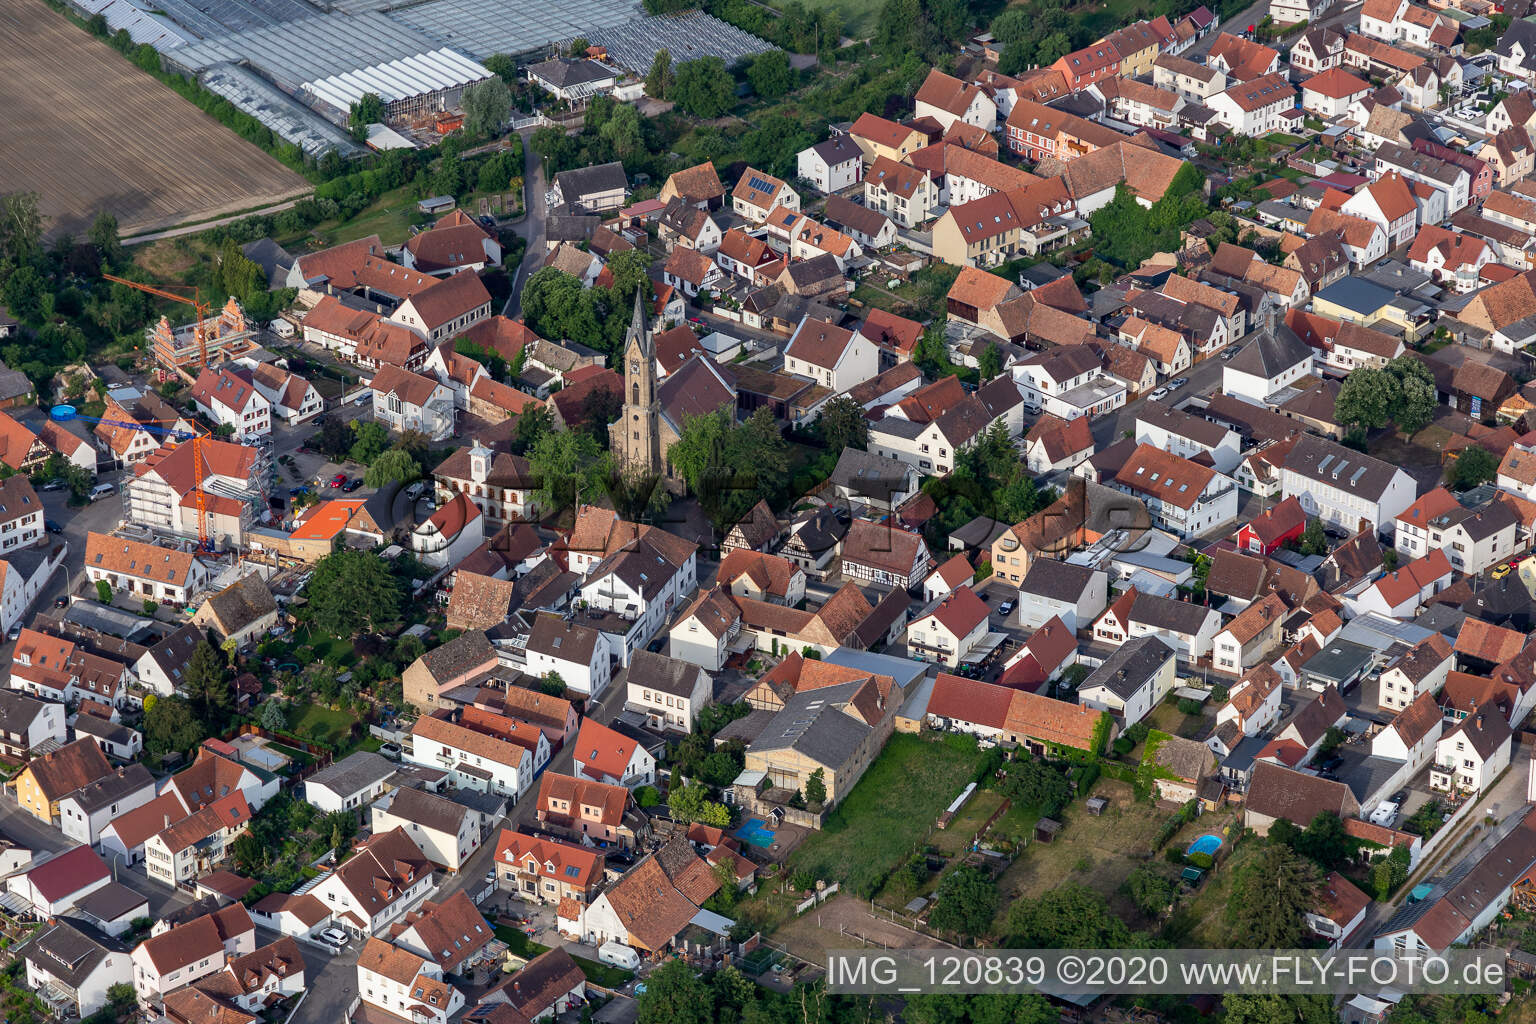 District Sondernheim in Germersheim in the state Rhineland-Palatinate, Germany from the drone perspective